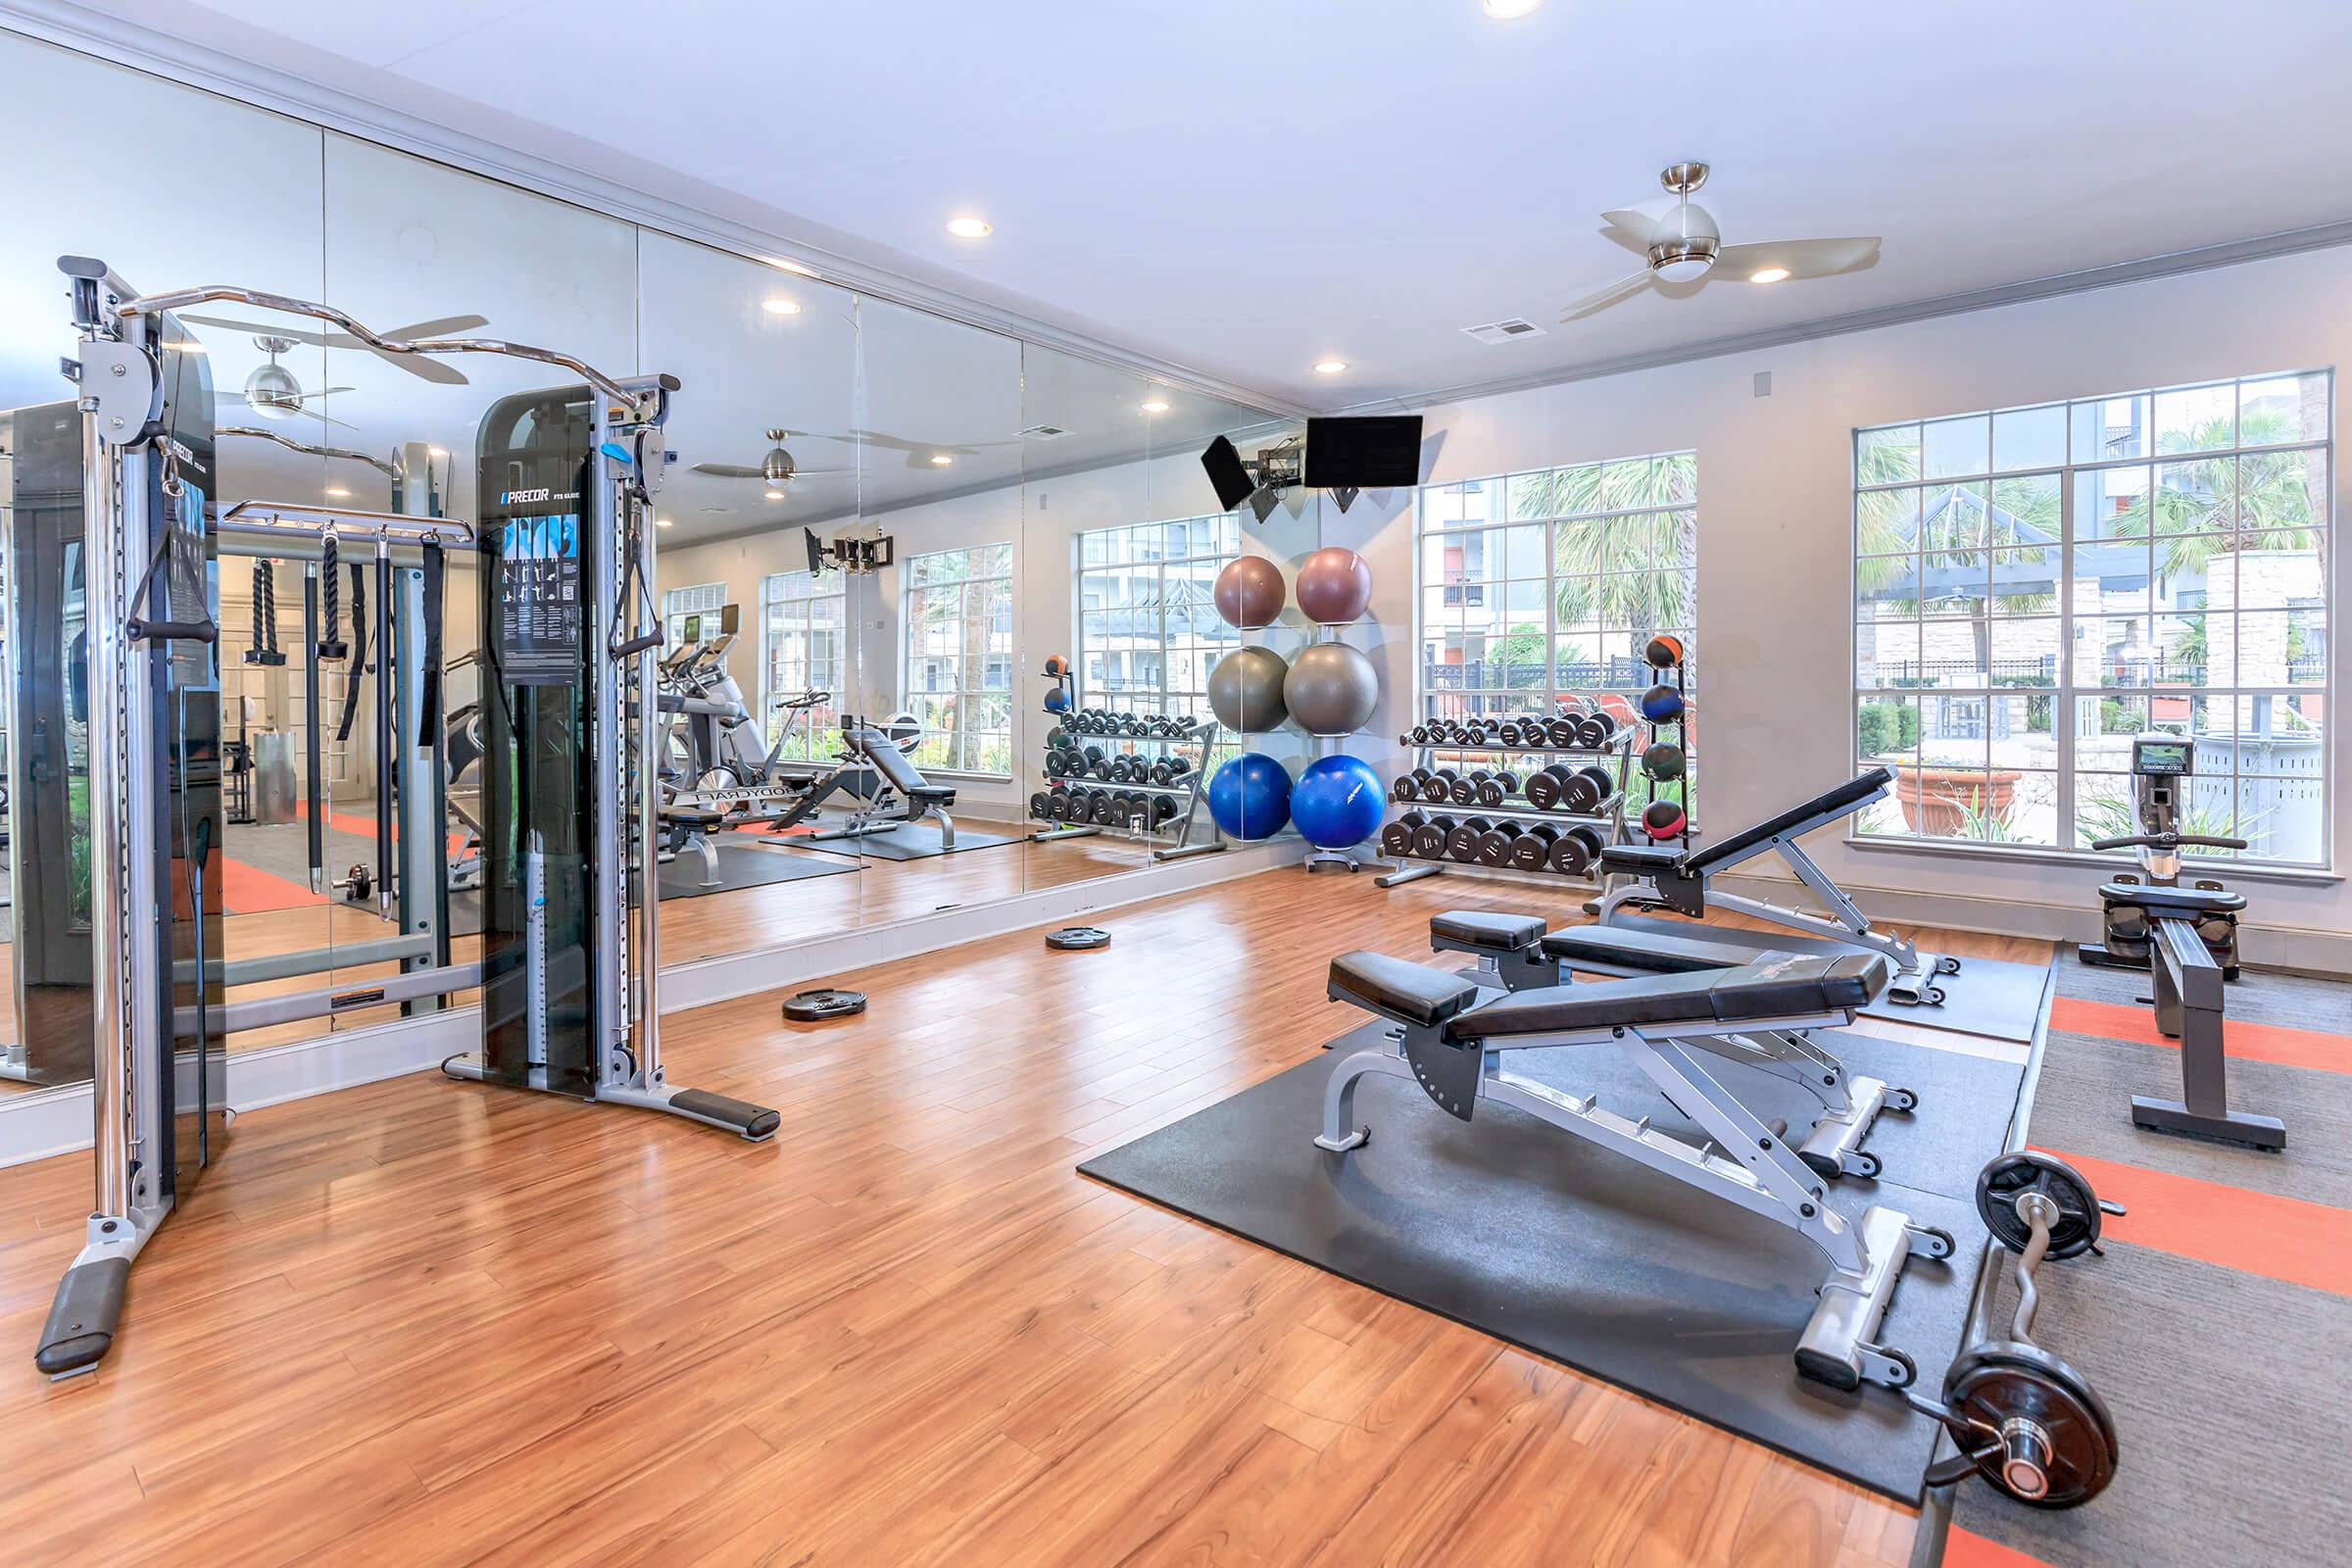 WORK OUT IN OUR STATE-OF-THE-ART FITNESS CENTER